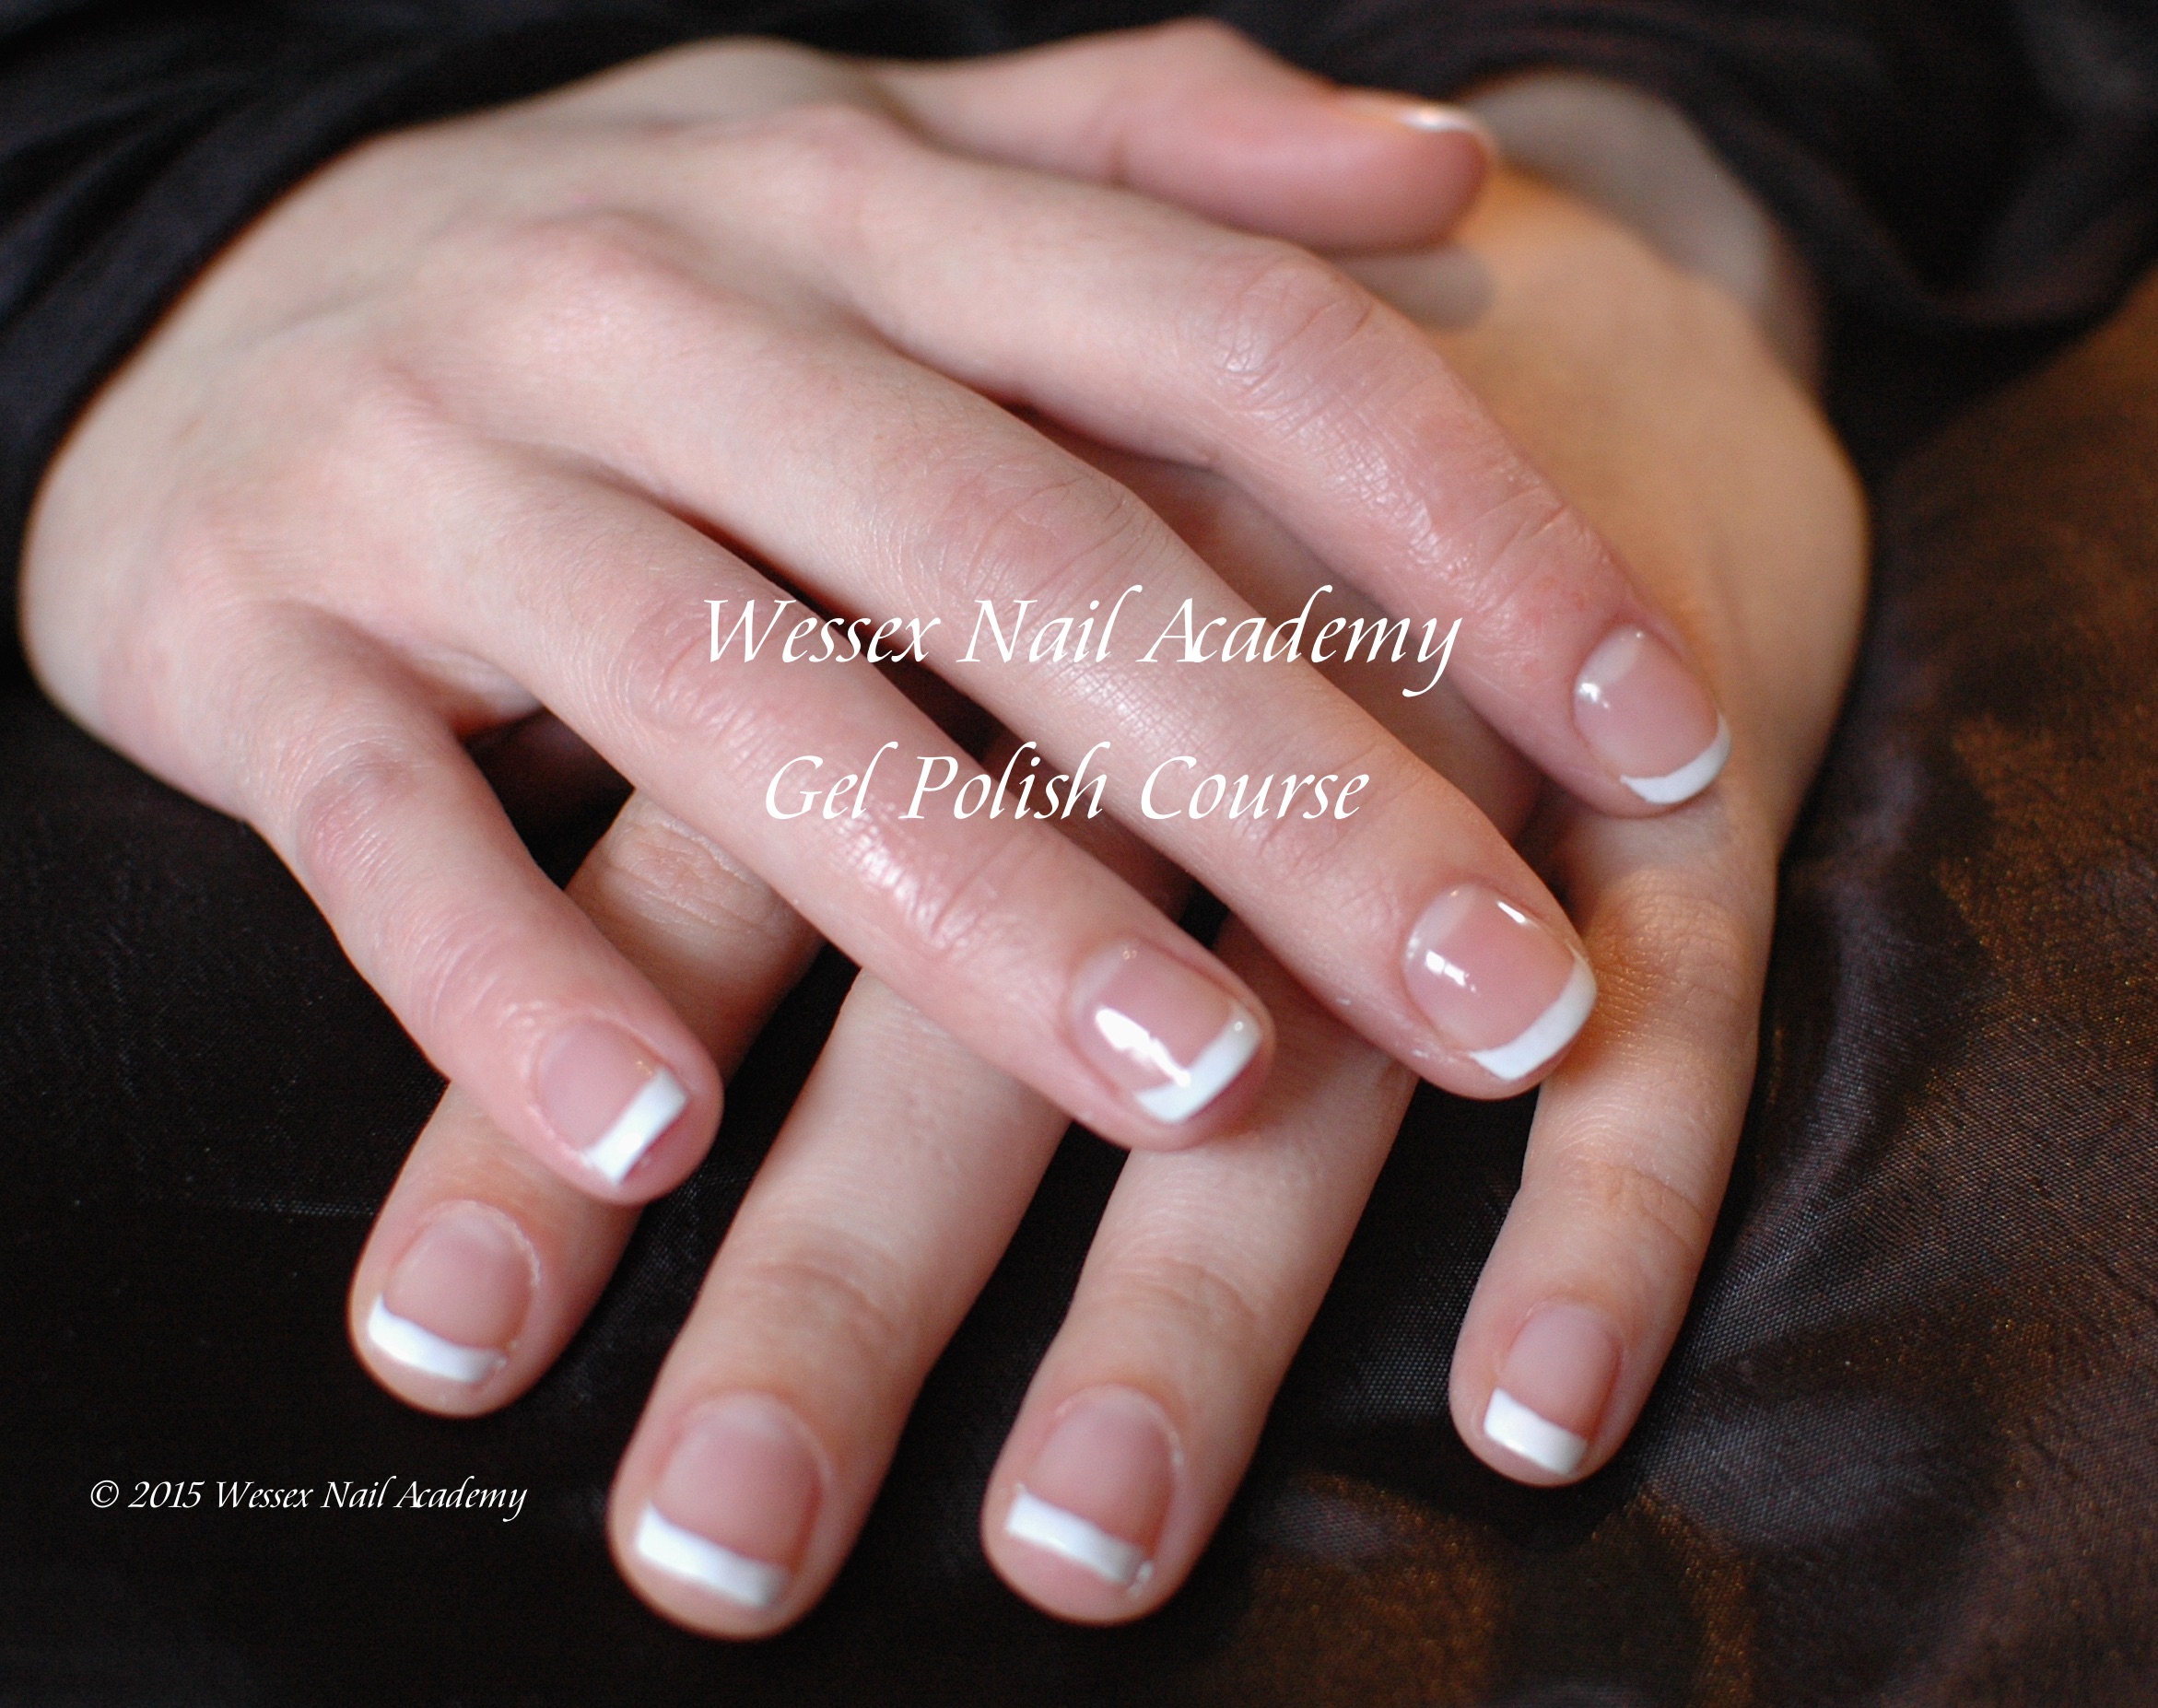 Gel Polish Beginners Manicure Student Work, Nail extension training , nail training course, Okeford Fitzpaine, Dorset